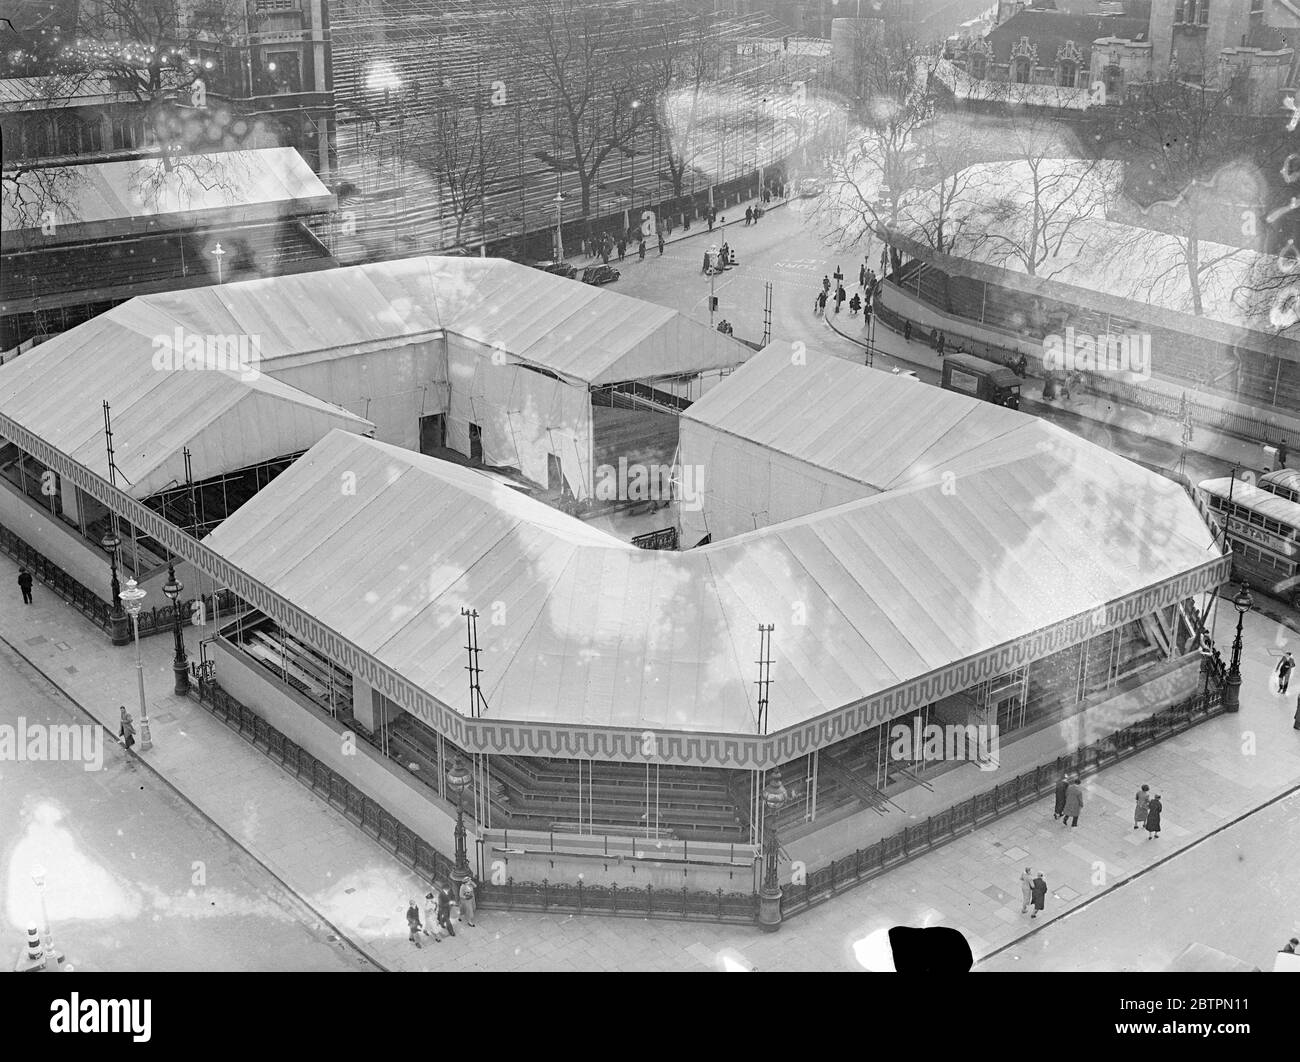 Coronation 'arena'. A birds eye view of the Coronation grandstands, looking something like a sports arena, which now occupy all the centre of the Parliament Square, Westminster. These seats will provide an excellent view of the procession new Westminster Abbey. 14 April 1937 Stock Photo